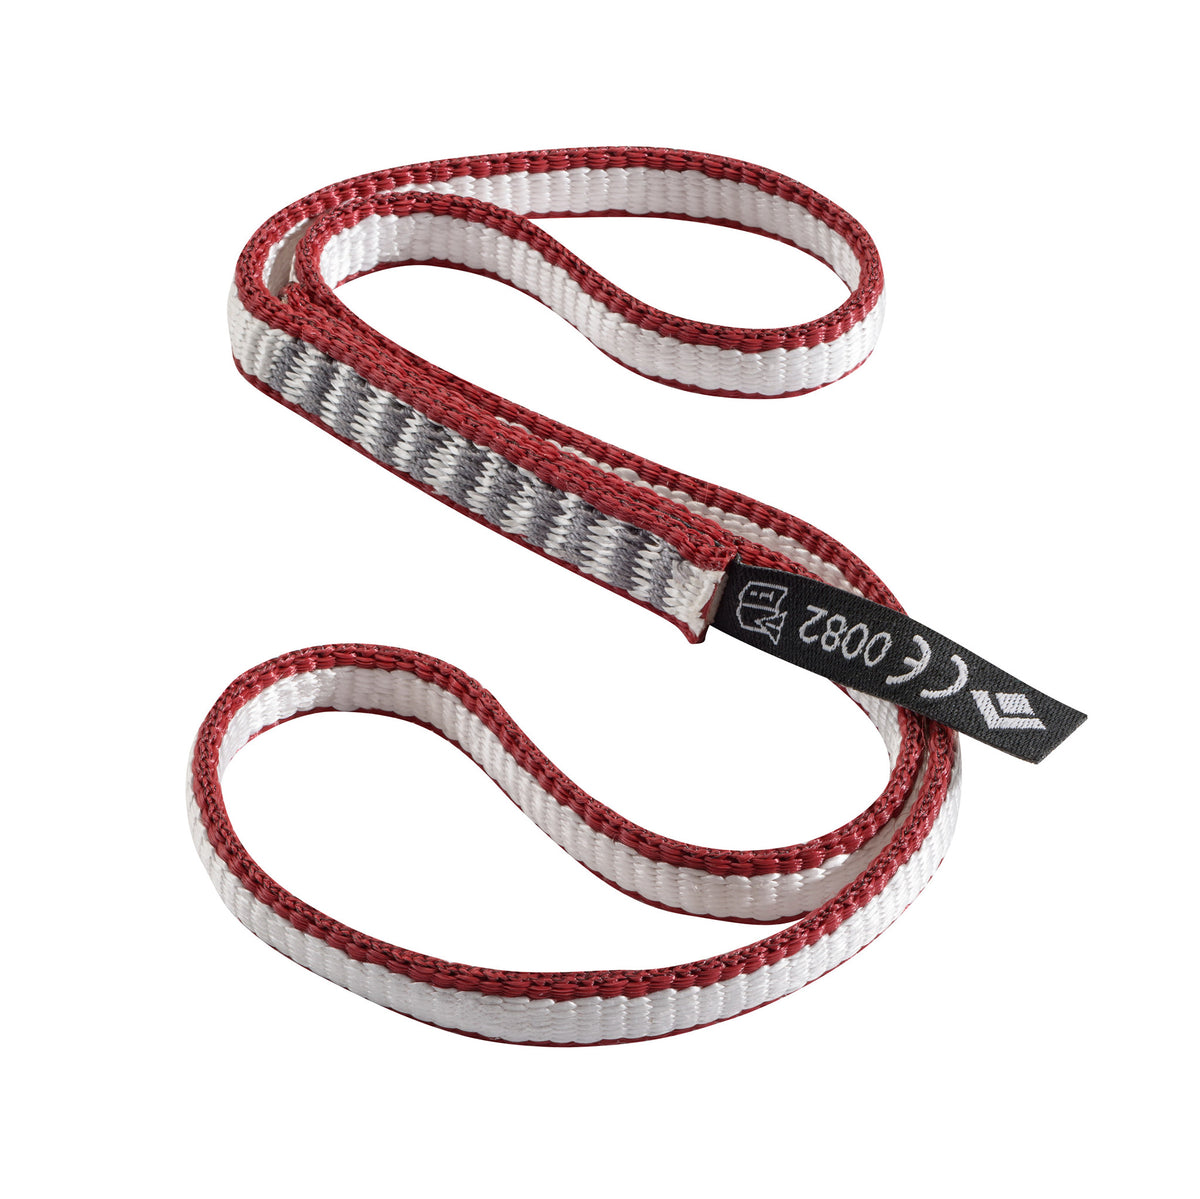 a photo of a black diamond 10mm dynex runner in the 30 cm red size